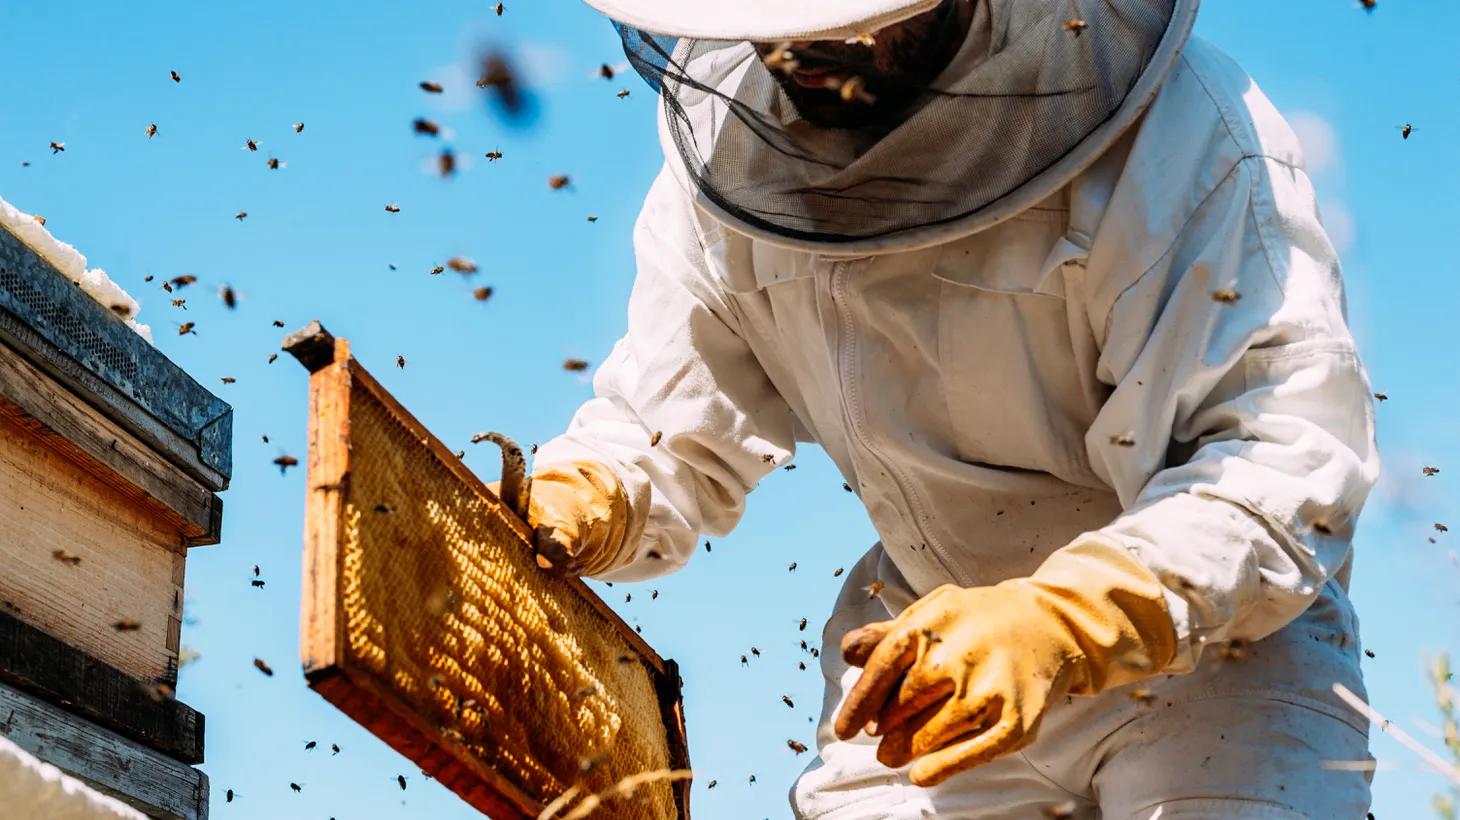 In California, many beekeepers now bring in two-thirds of income from hive rental and one-third from producing honey. It used to be the other way around.